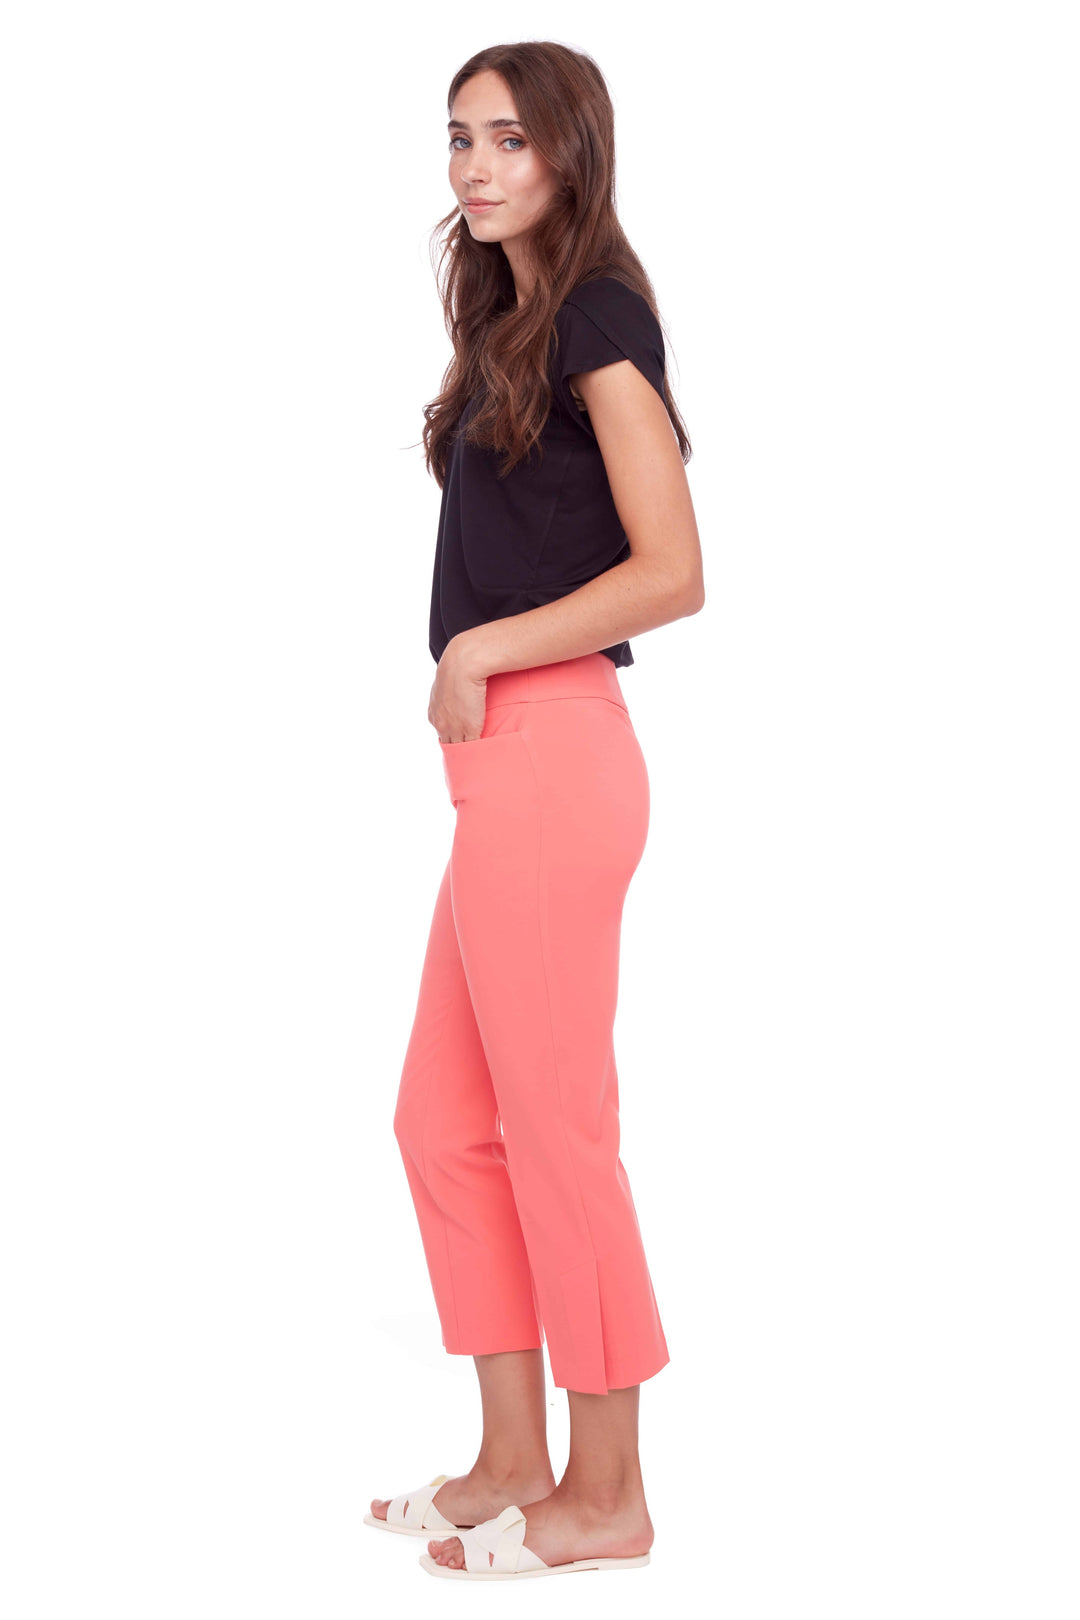 UP! Womens Pant 68041